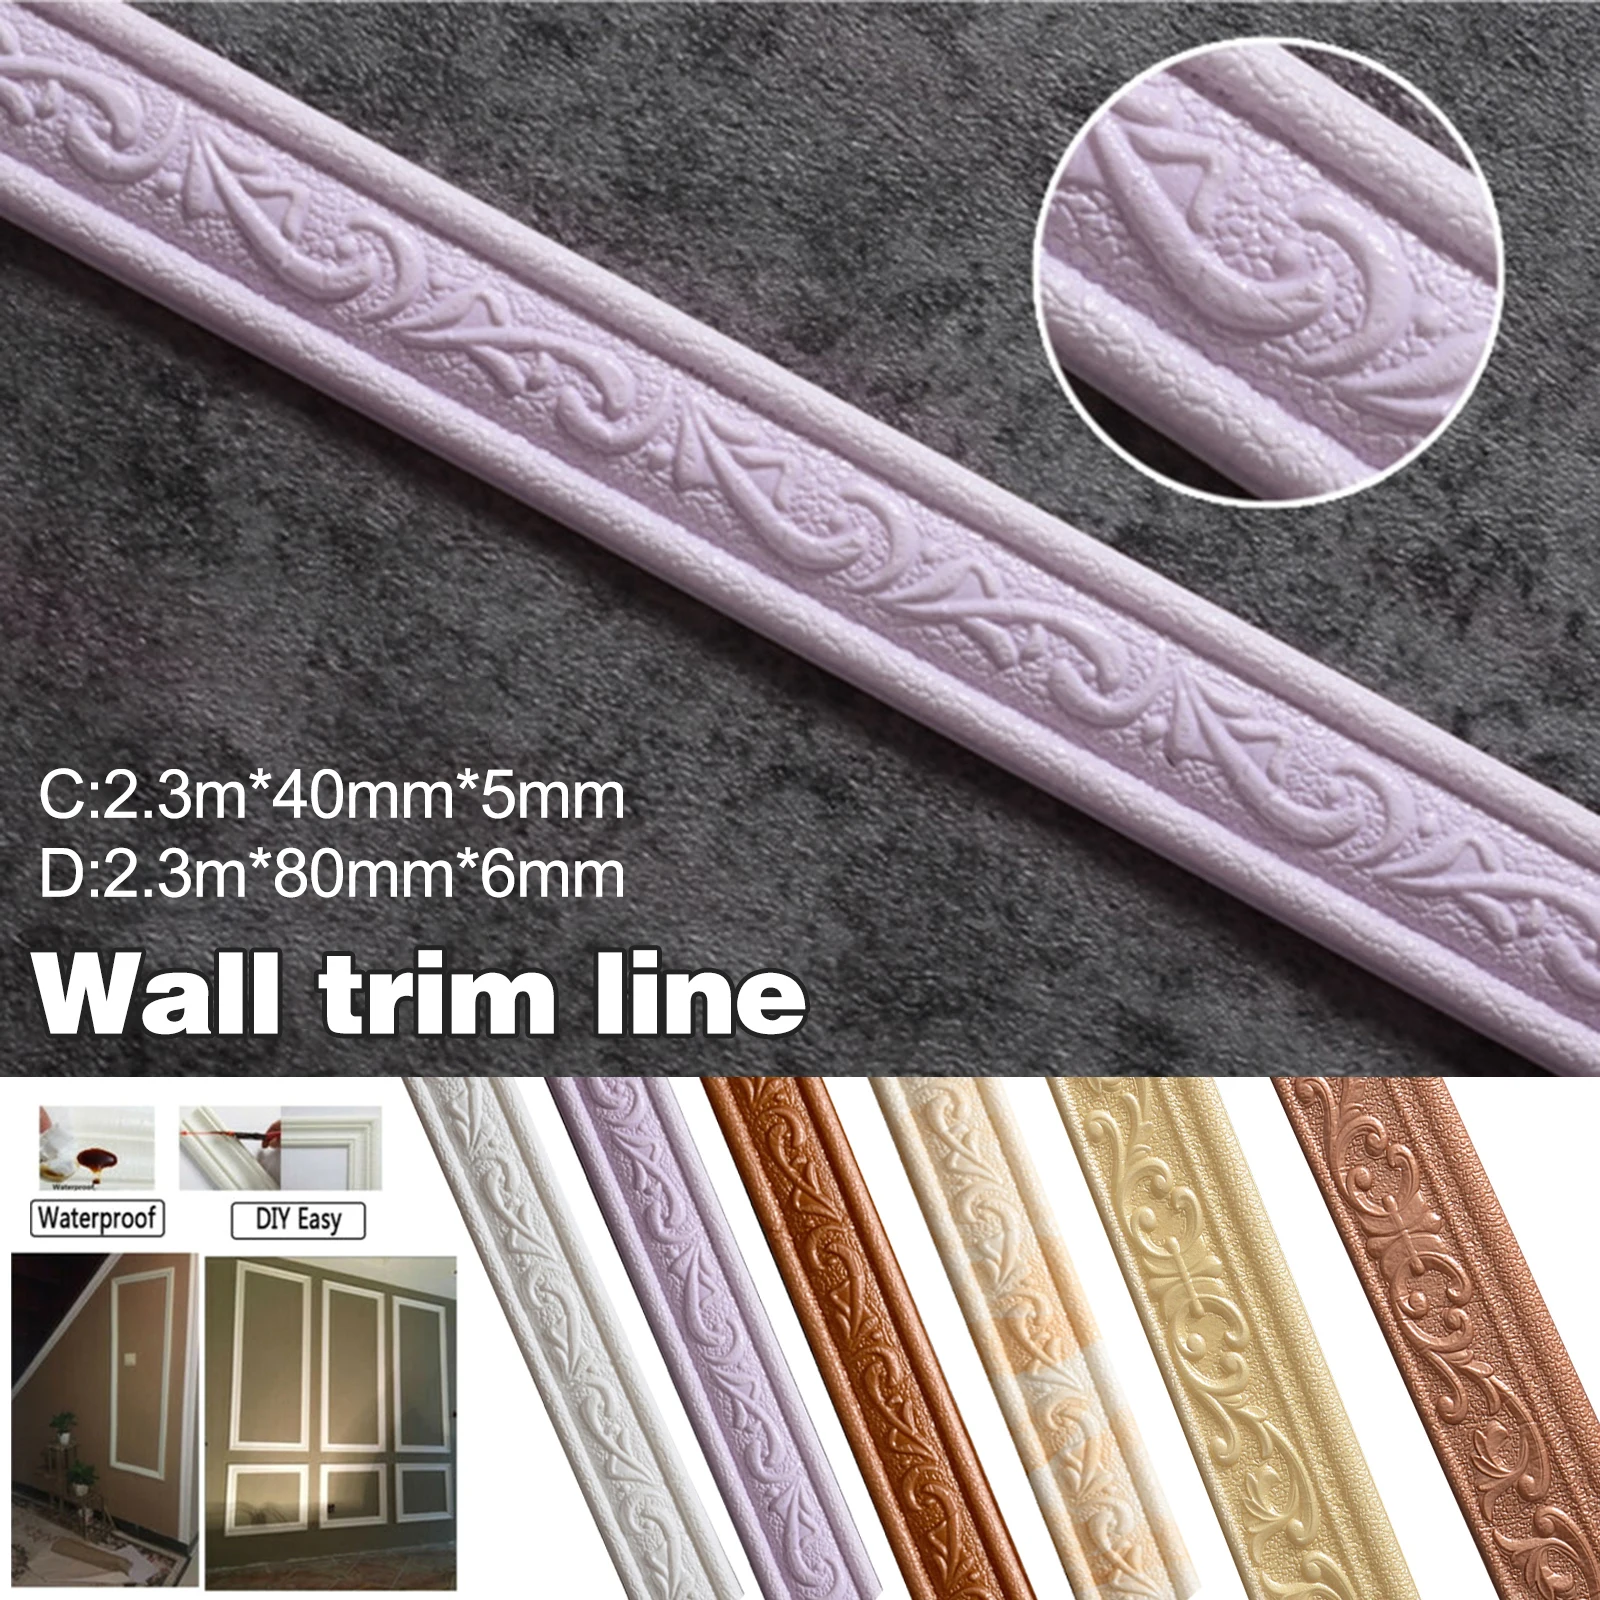 WHIO 3D Pattern Self Adhesive Wallpaper Wall Trim Sticker Line Skirting Border Decoration for Home Wall Decor 2.3M